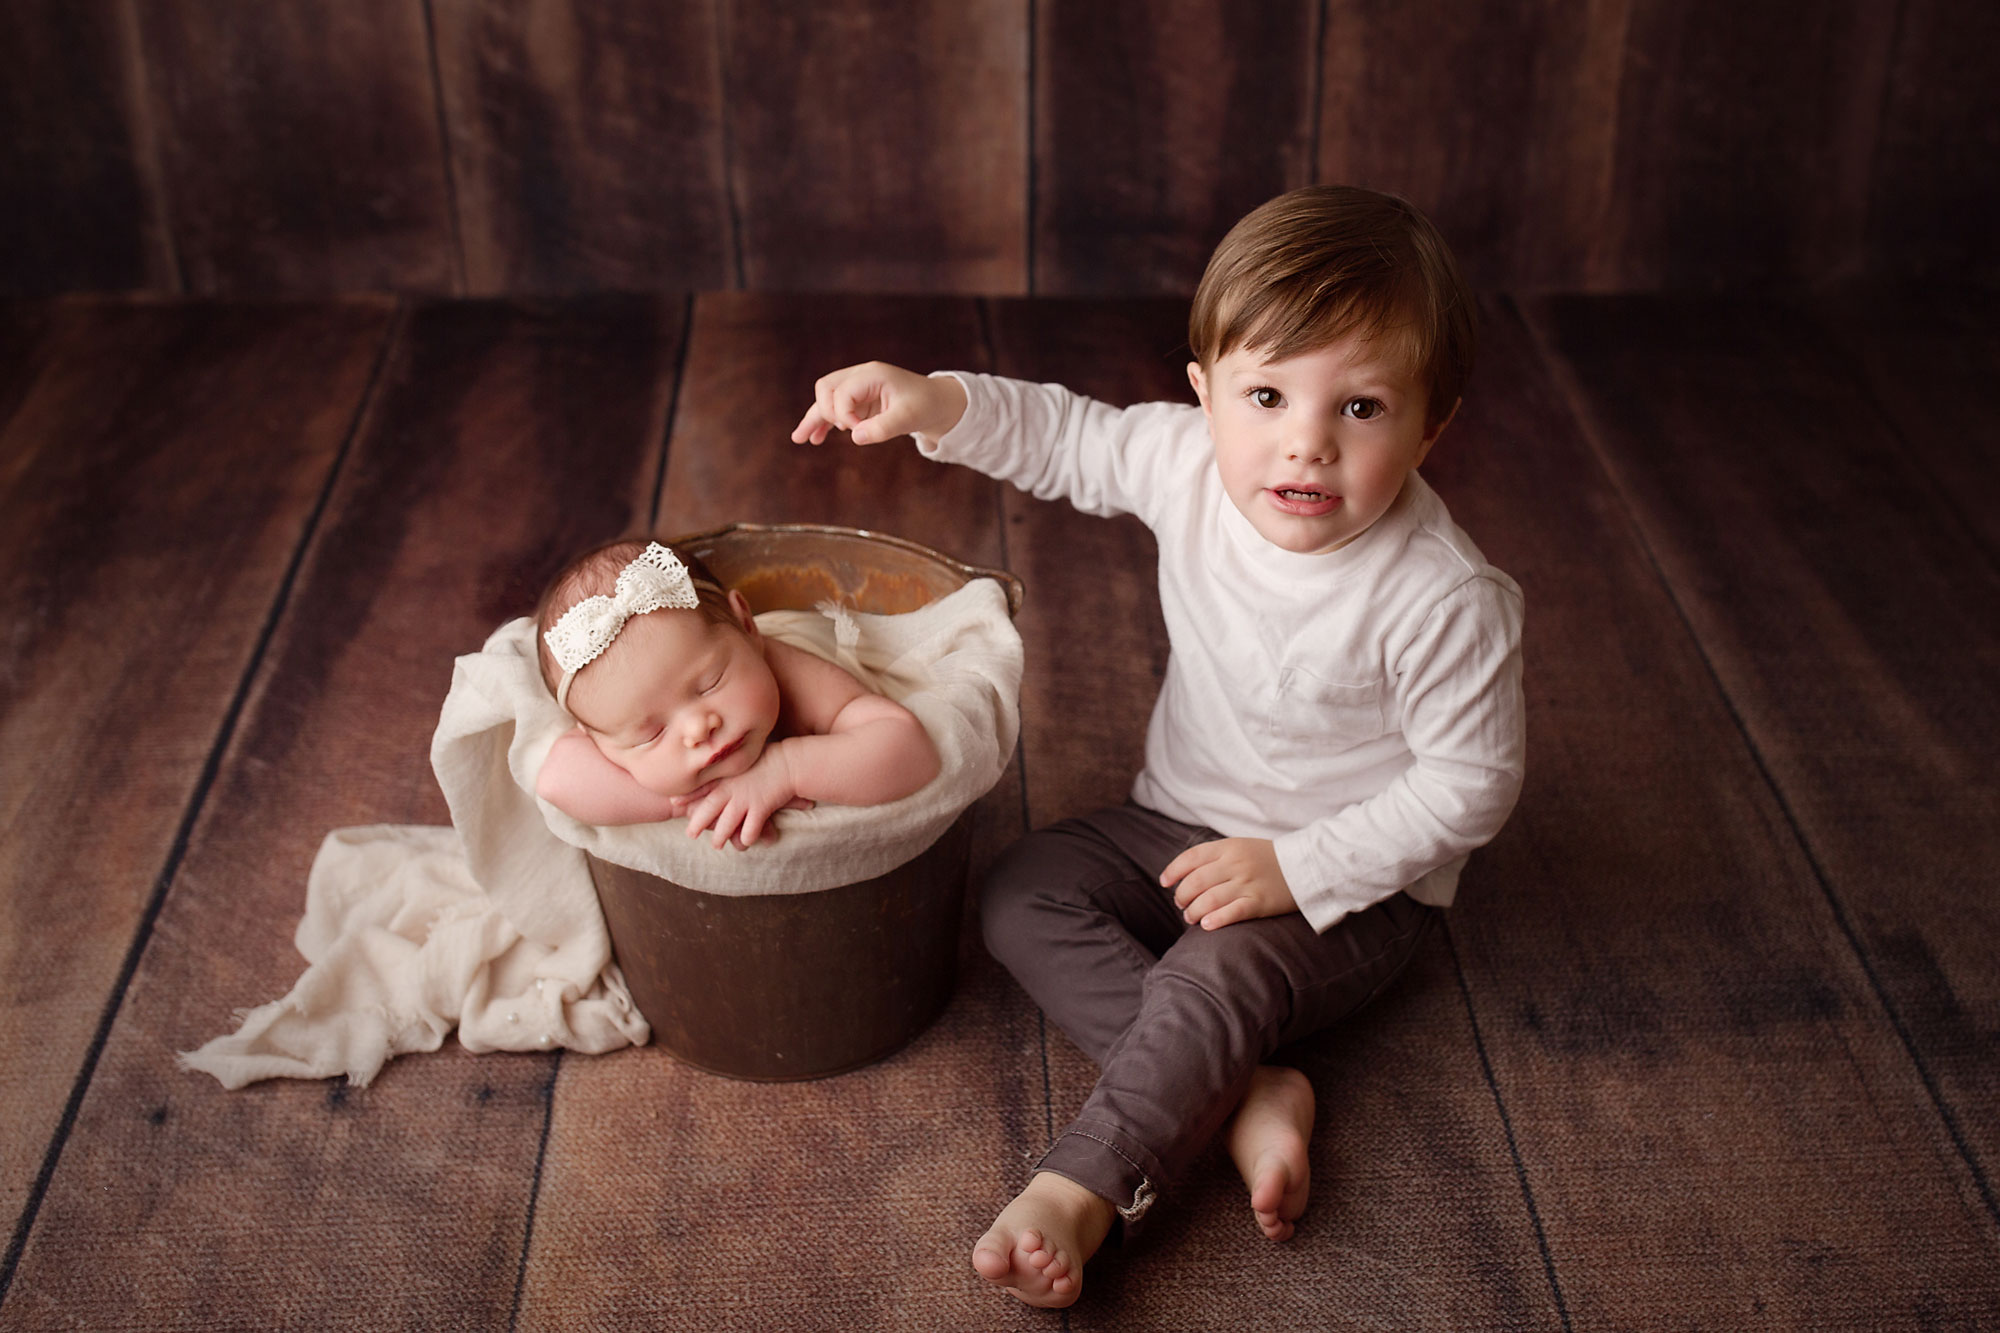 newborn and siblings images near me New Jersey, toddler boy seated on floor next to baby sister